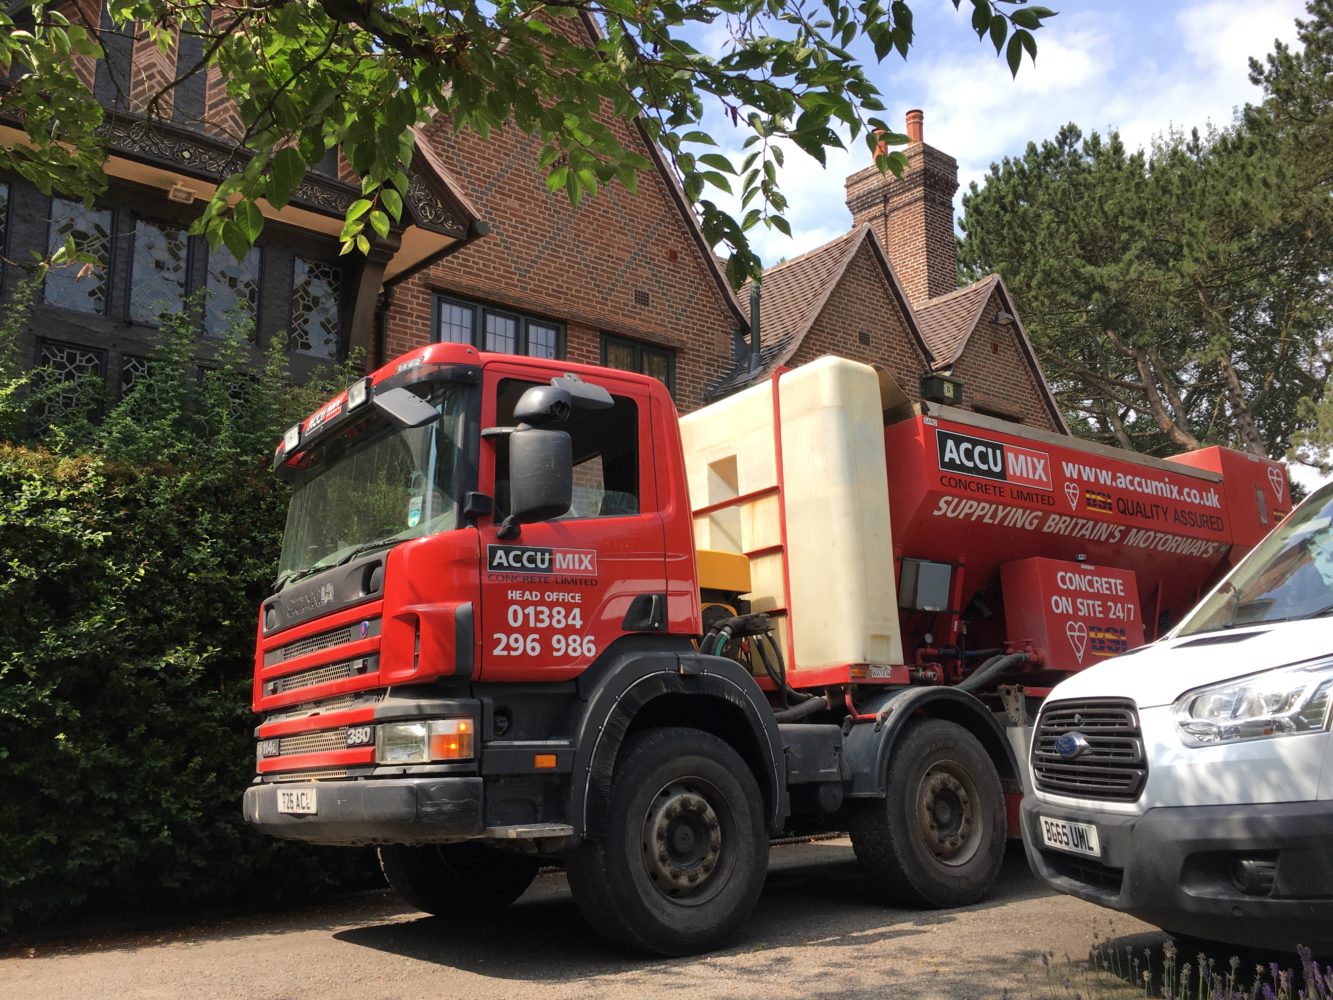 Truck delivering concrete to a domestic household